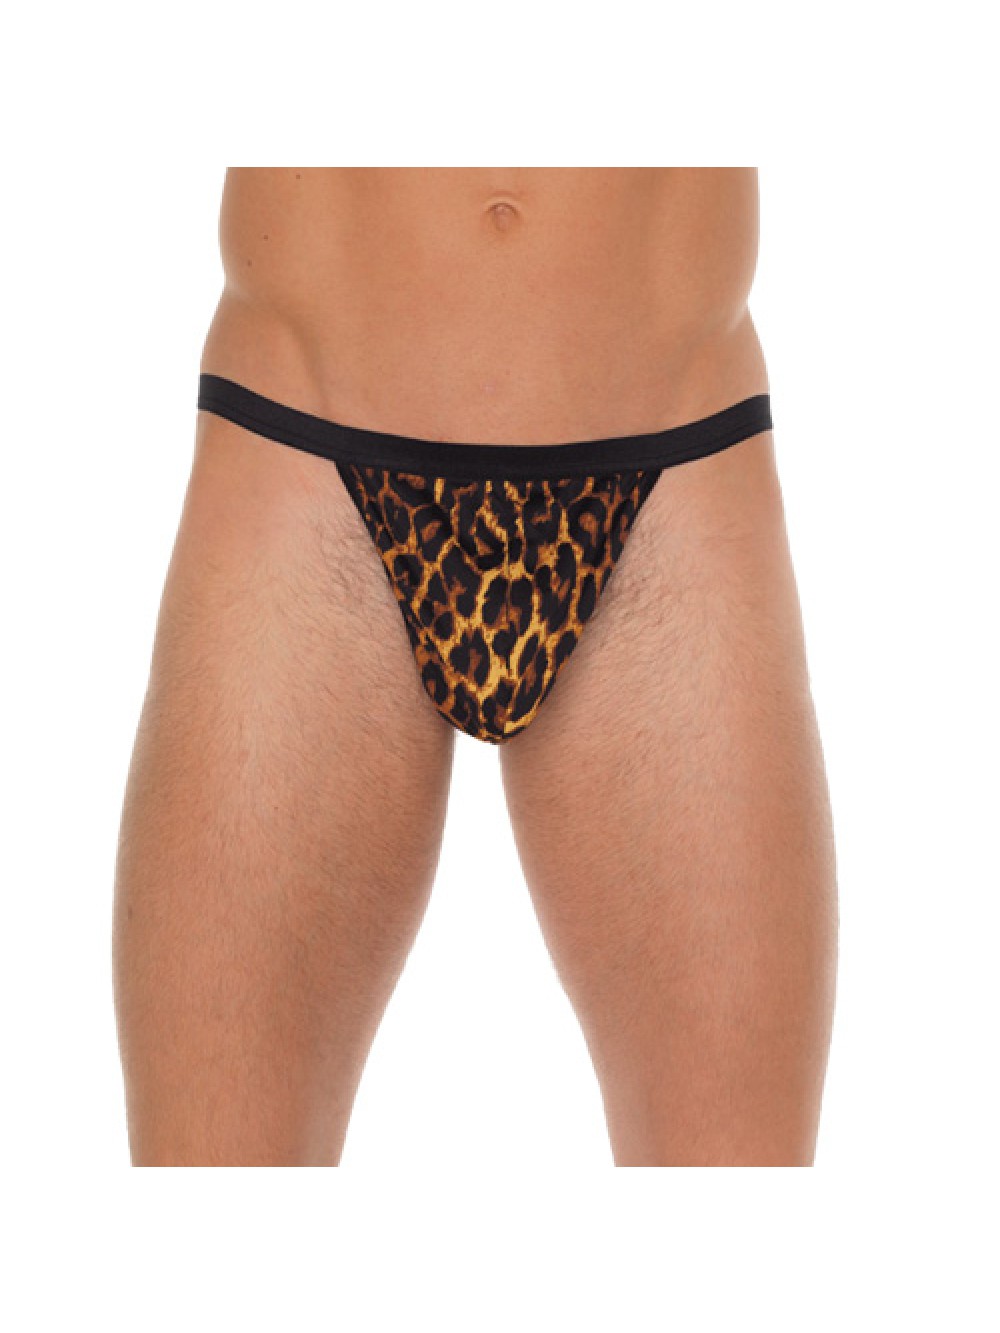 Mens Black G-String With Leopard Print Pouch